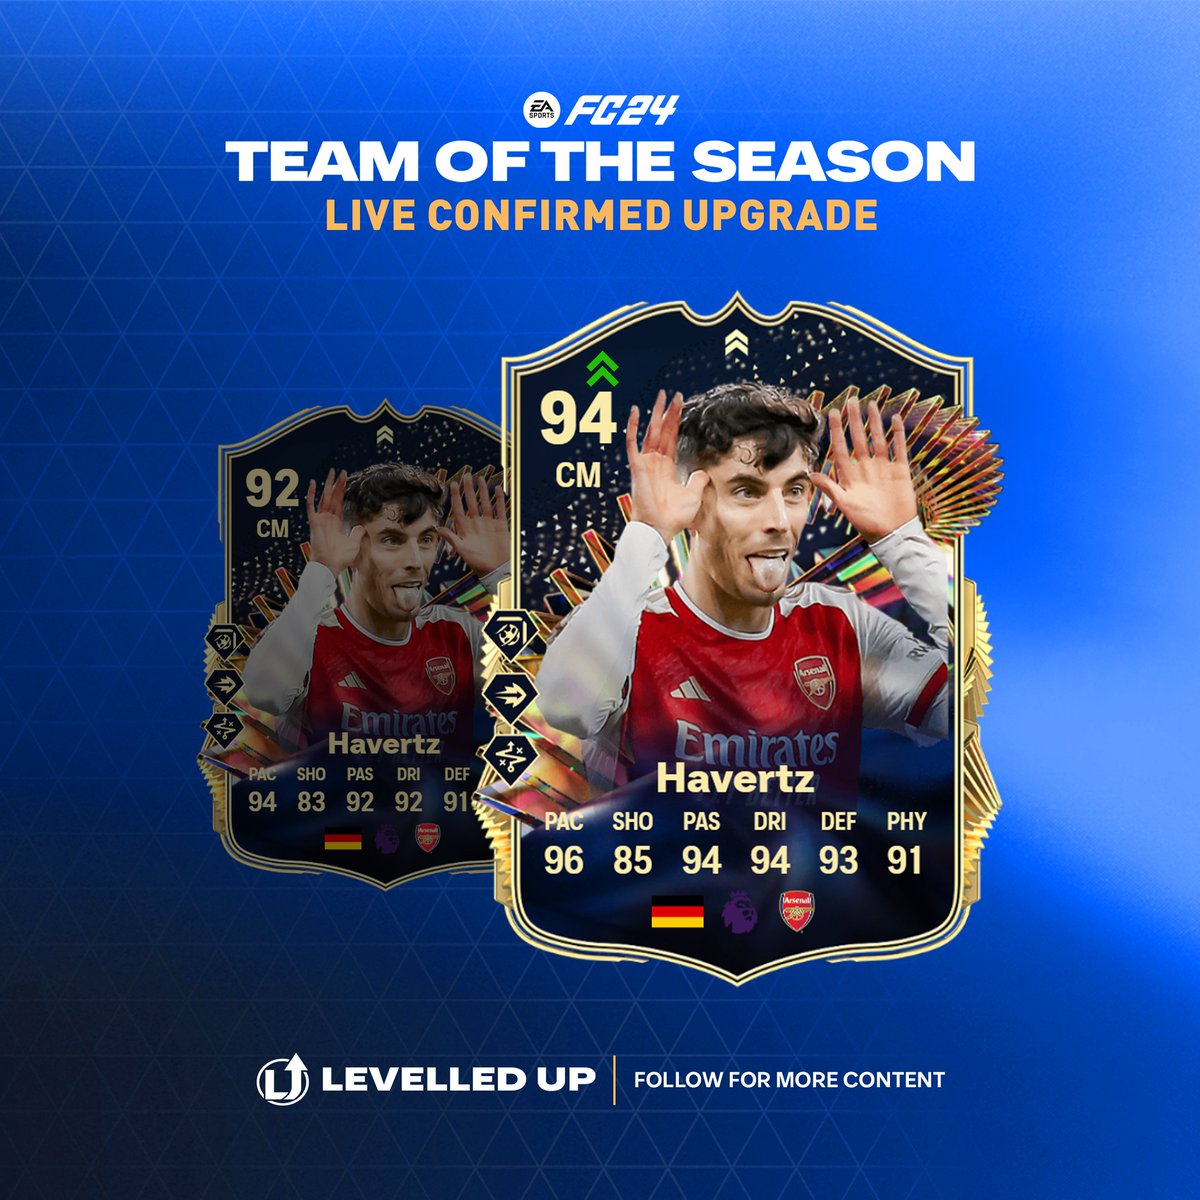 Havertz with the +2 later this week! ⏫ Check out all the upgrades expected on Wednesday! Link below! How many of your players are getting one?